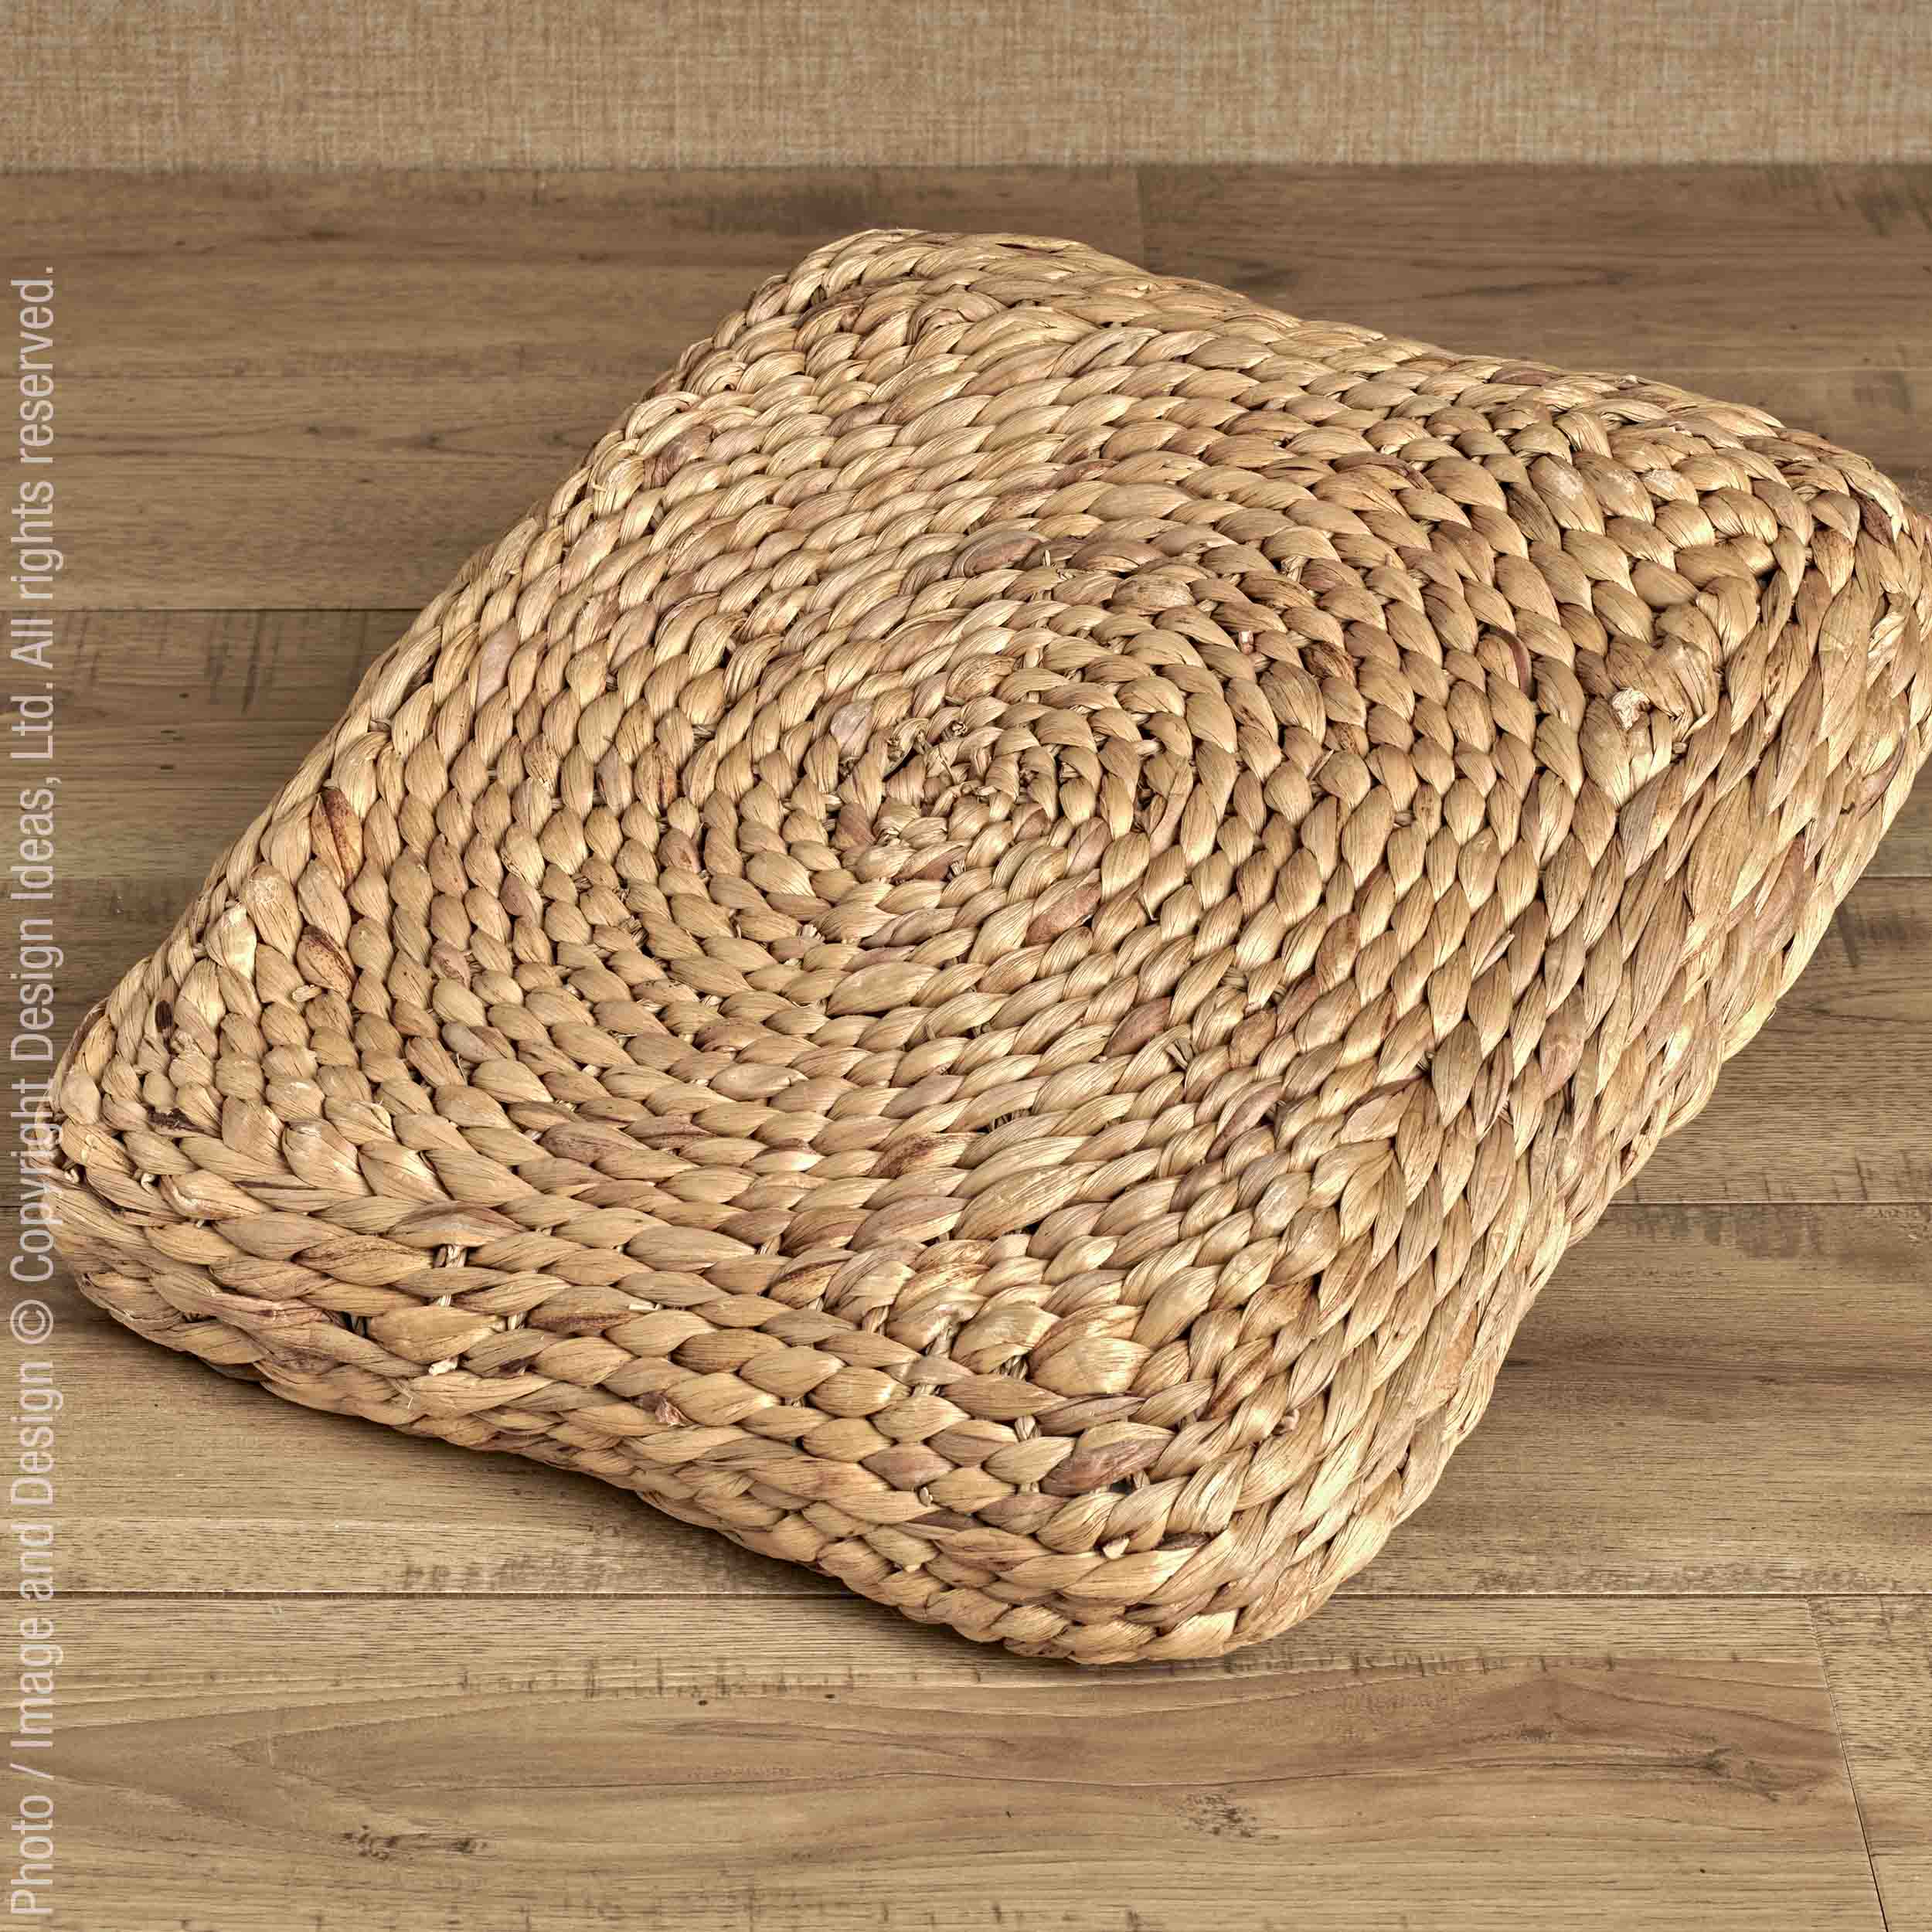 Adria™ cushion - Natural | Image 1 | Premium Cushion cover from the Adria collection | made with Water Hyacinth Twine for long lasting use | texxture